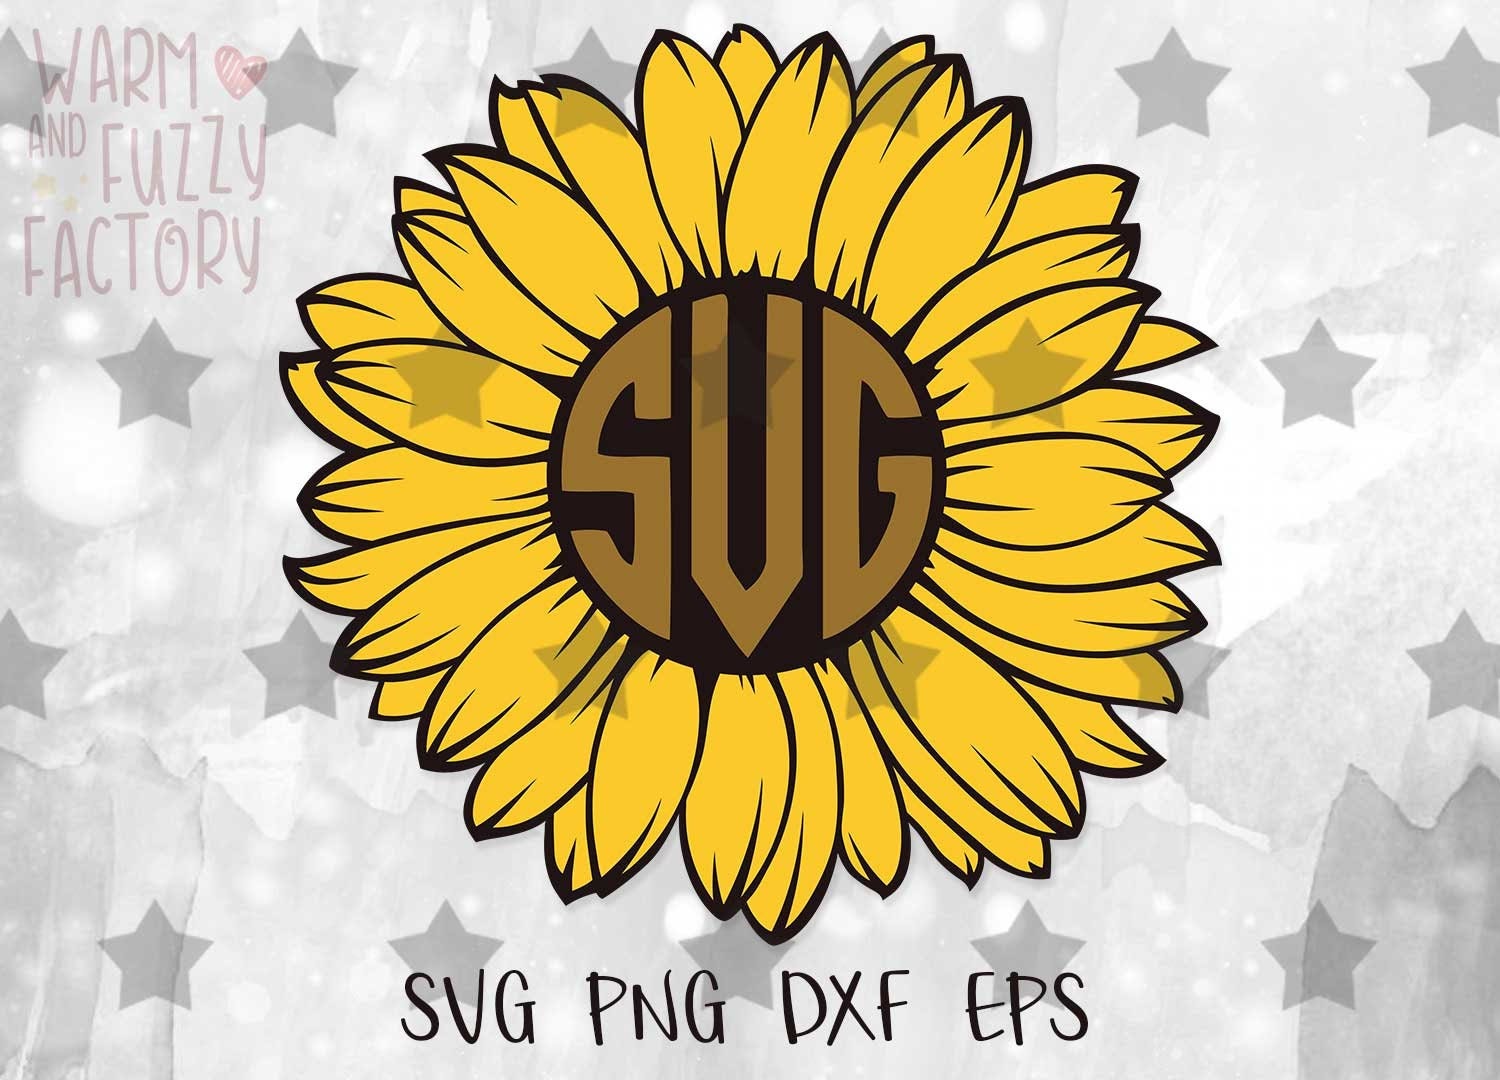 Sunflower Silhouette Svg Free - Free Layered SVG Files